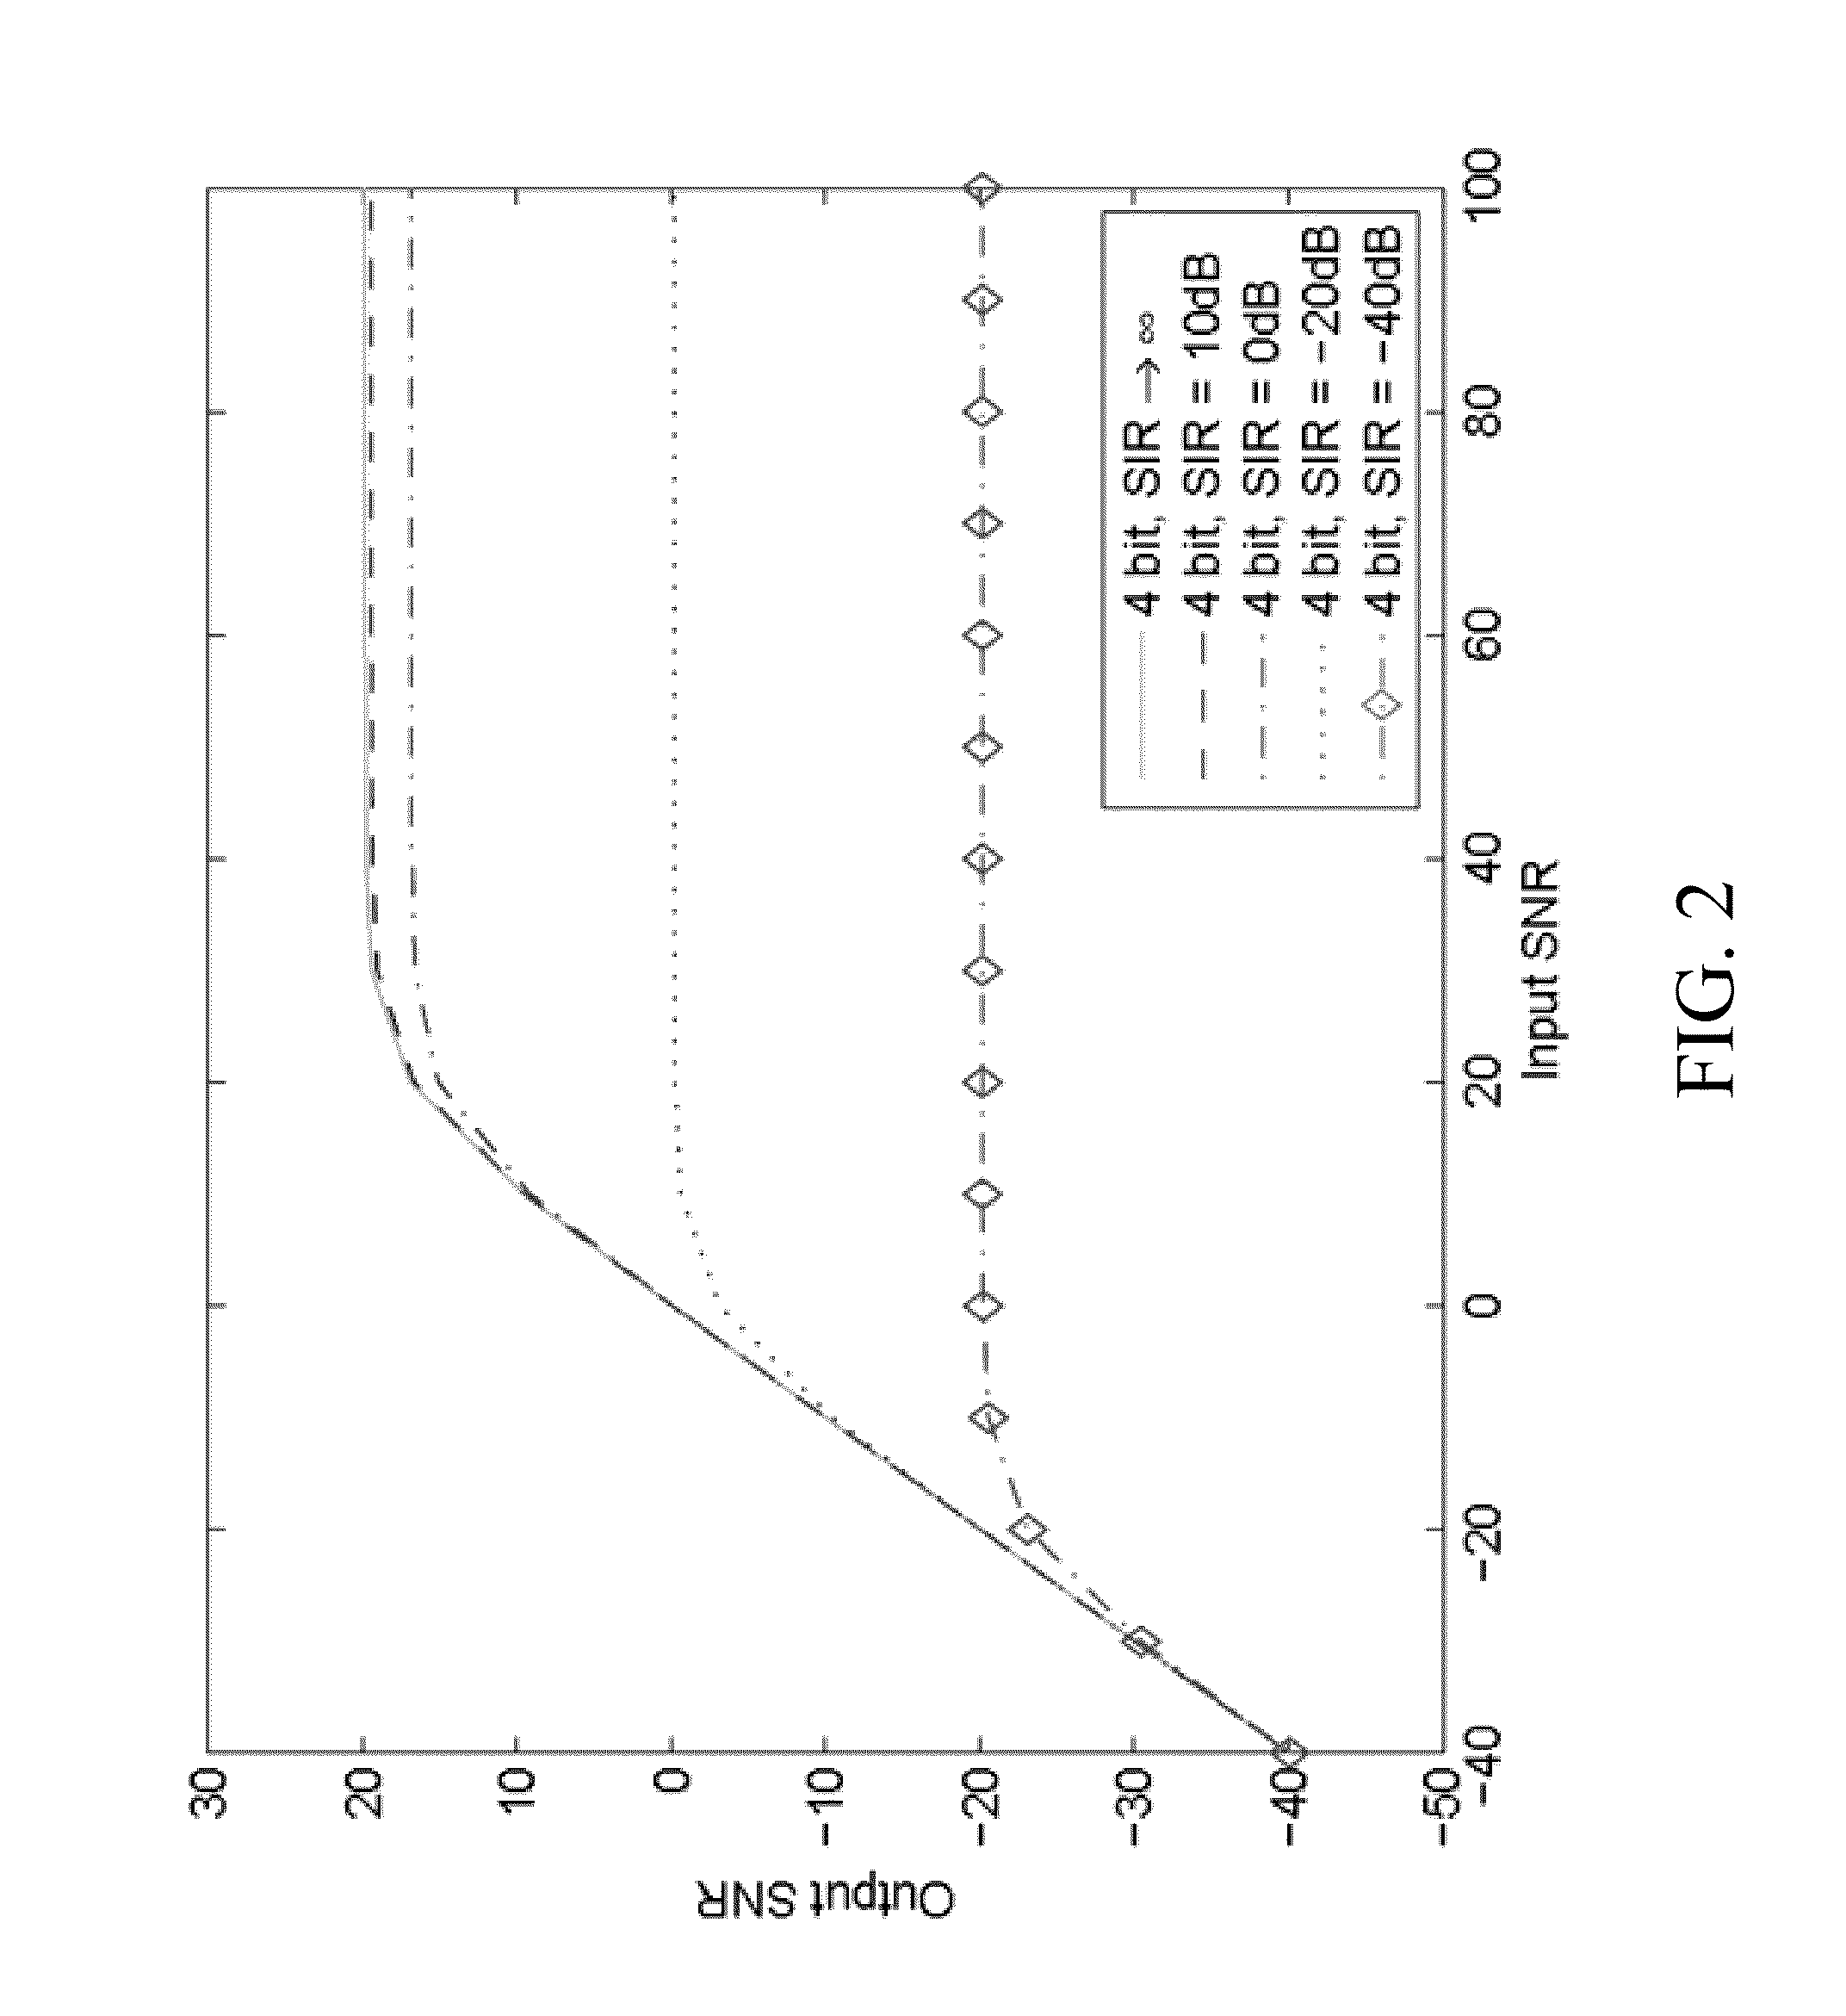 Interference Cancellation for Full-Duplex Communications